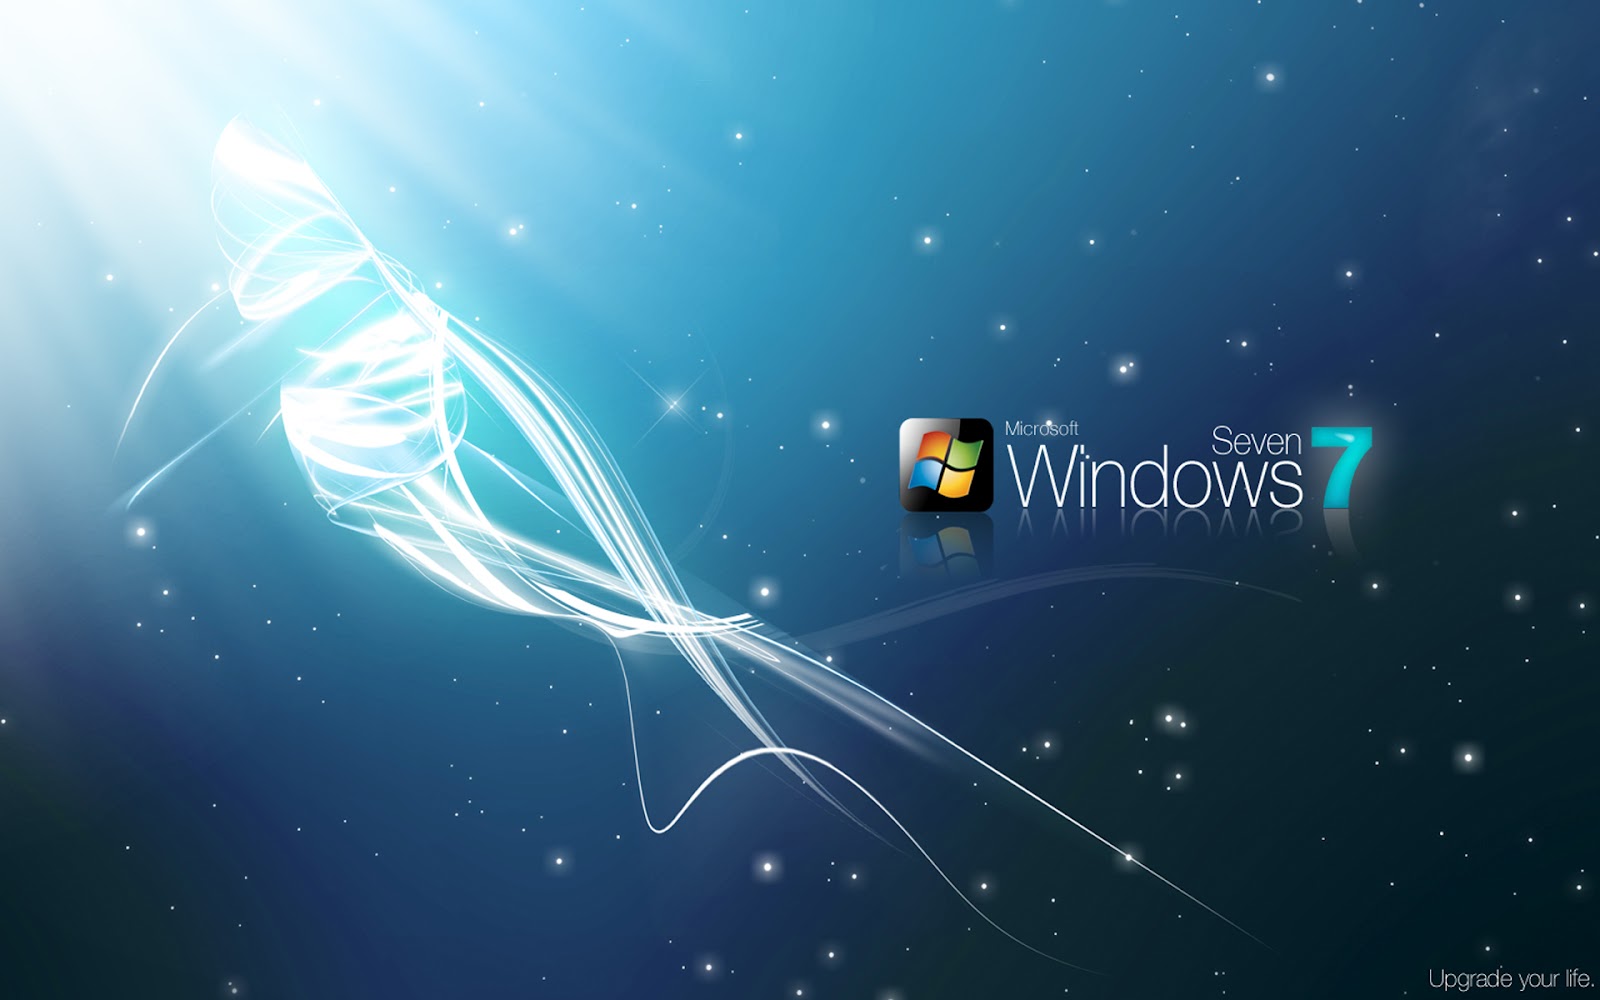 hd wallpapers of windows 7 ultimate Unique Things